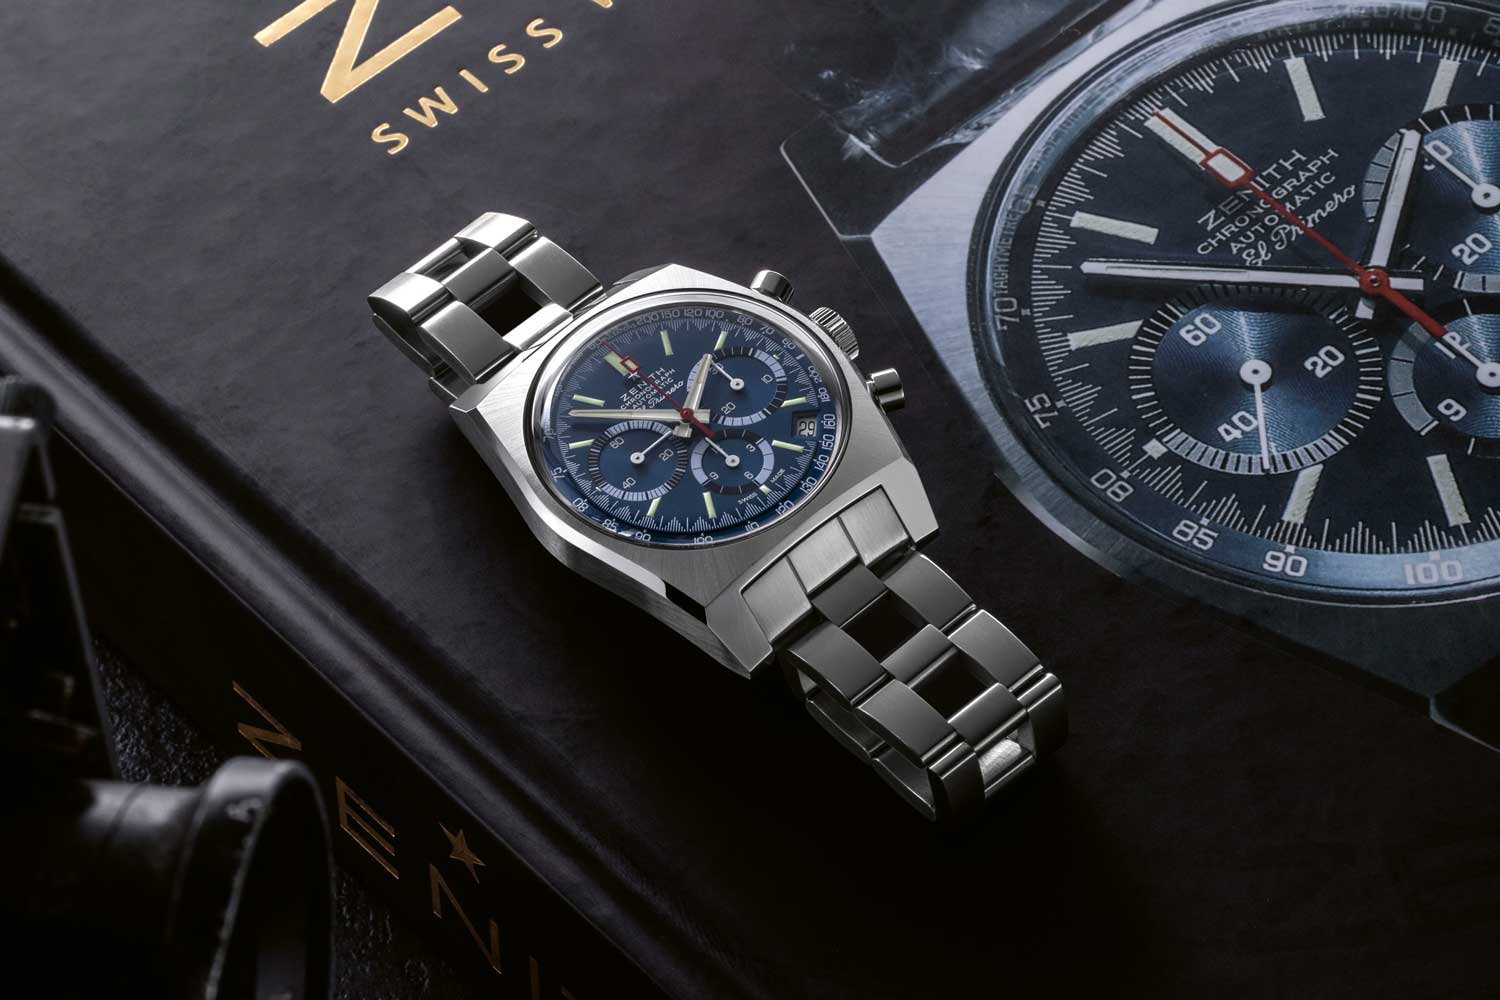 Available in a limited edition of 100 pieces, the 2020 Zenith × Revolution Chronomaster Revival ref. A3818 “Cover Girl” in stainless steel was the first of our limited editions created with Zenith, inspired by the original 1971 Zenith El Primero ref. A3818 (Image: Revolution©)